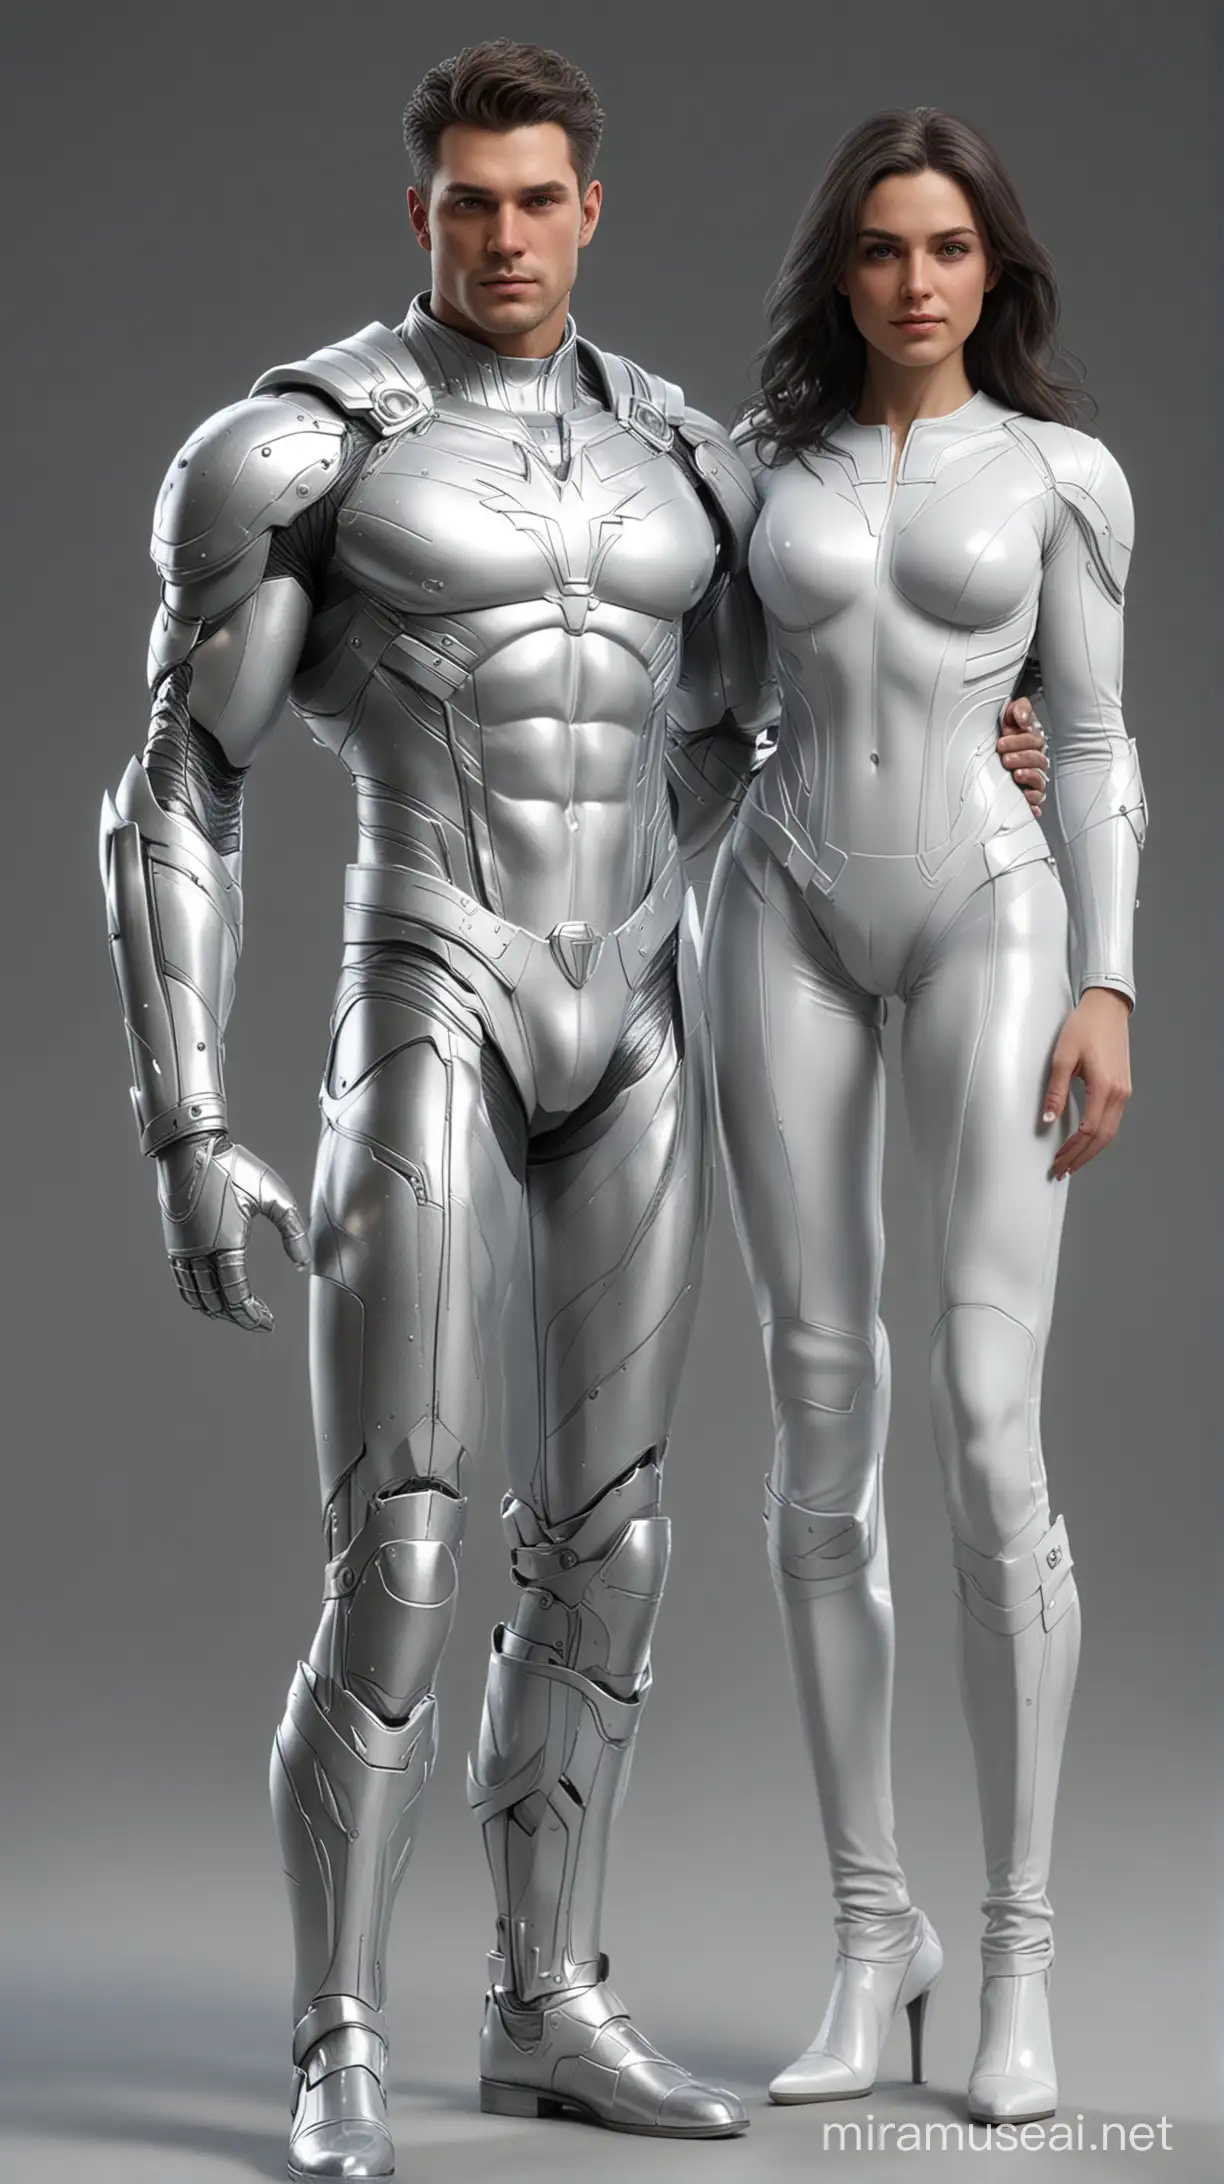 Beautiful Couple Wonderboy and Donna Troy in White and Silver Detailed Realistic Digital Art